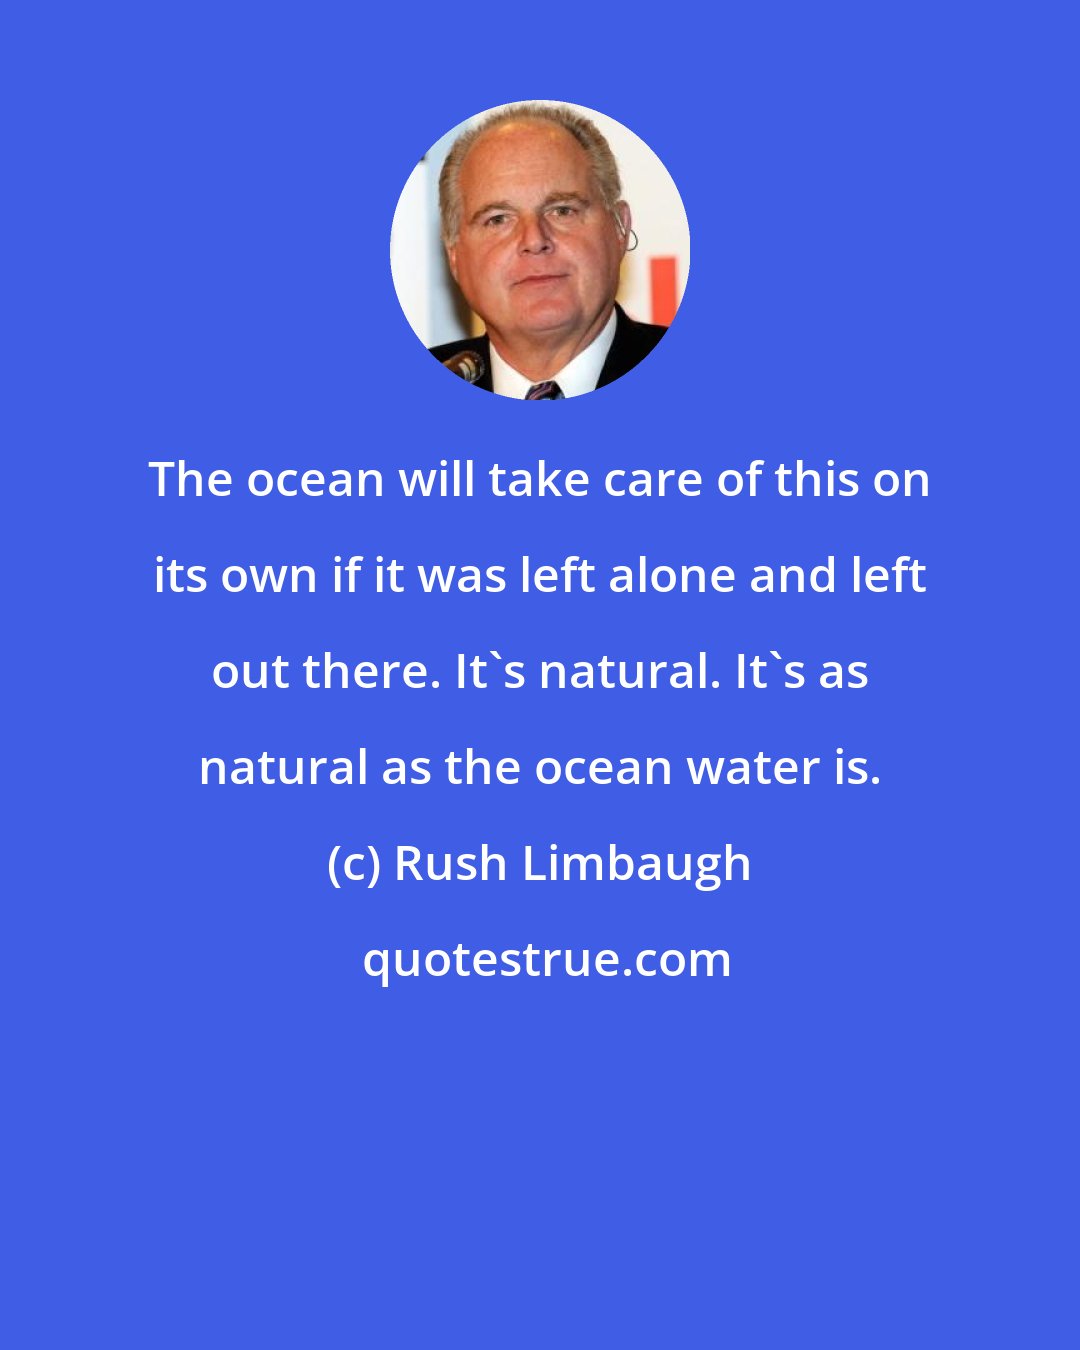 Rush Limbaugh: The ocean will take care of this on its own if it was left alone and left out there. It's natural. It's as natural as the ocean water is.